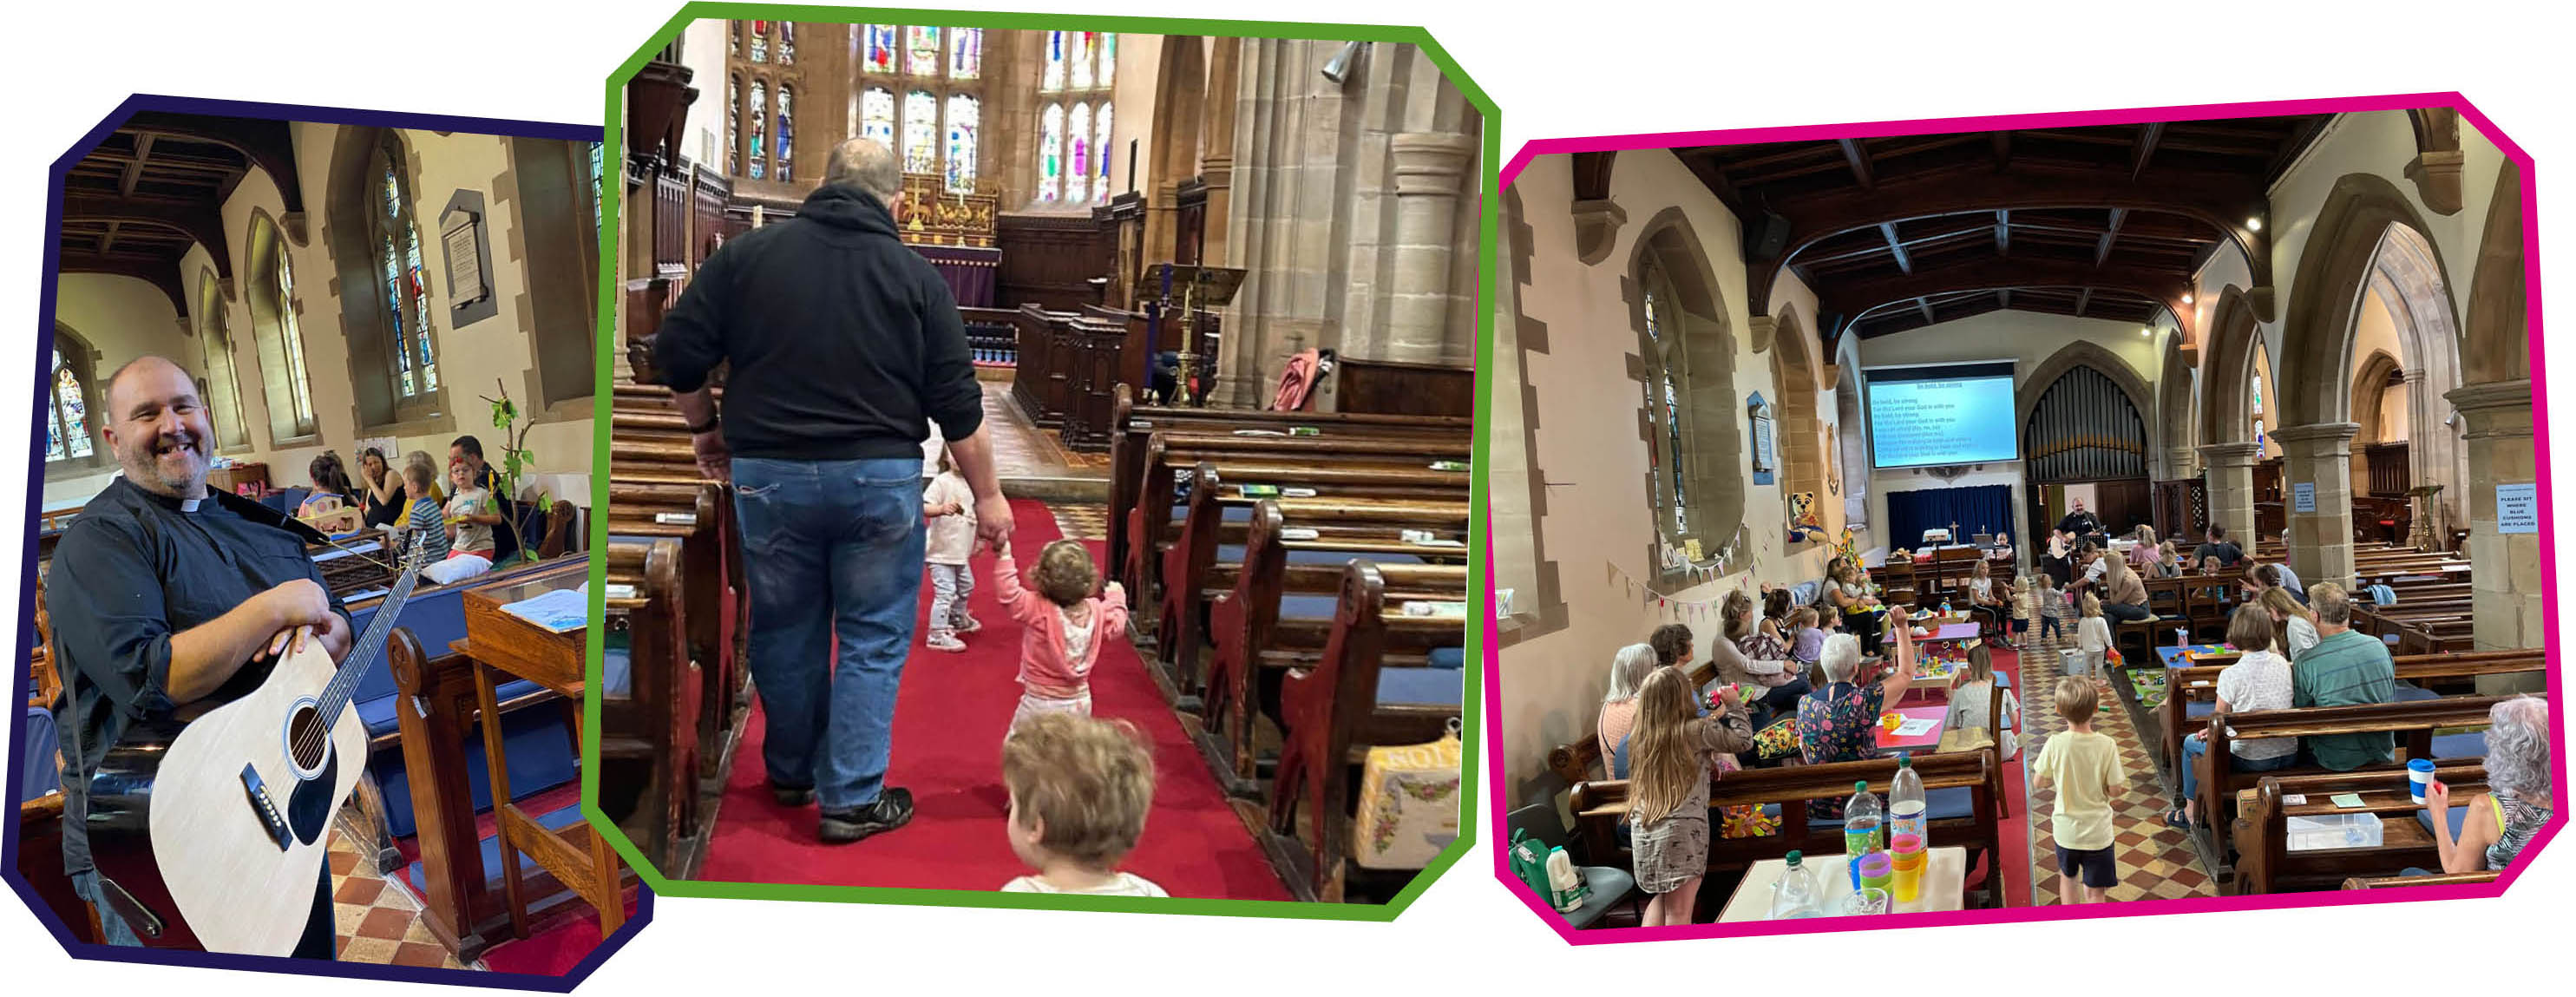 collage of three images: 1) Revd Andy Simpson in church with his acoustic guitar; 2) a man and toddler walking down the middle aisle of the church 3) overview of lots of adults and younger children siting in pews and around tables during worship